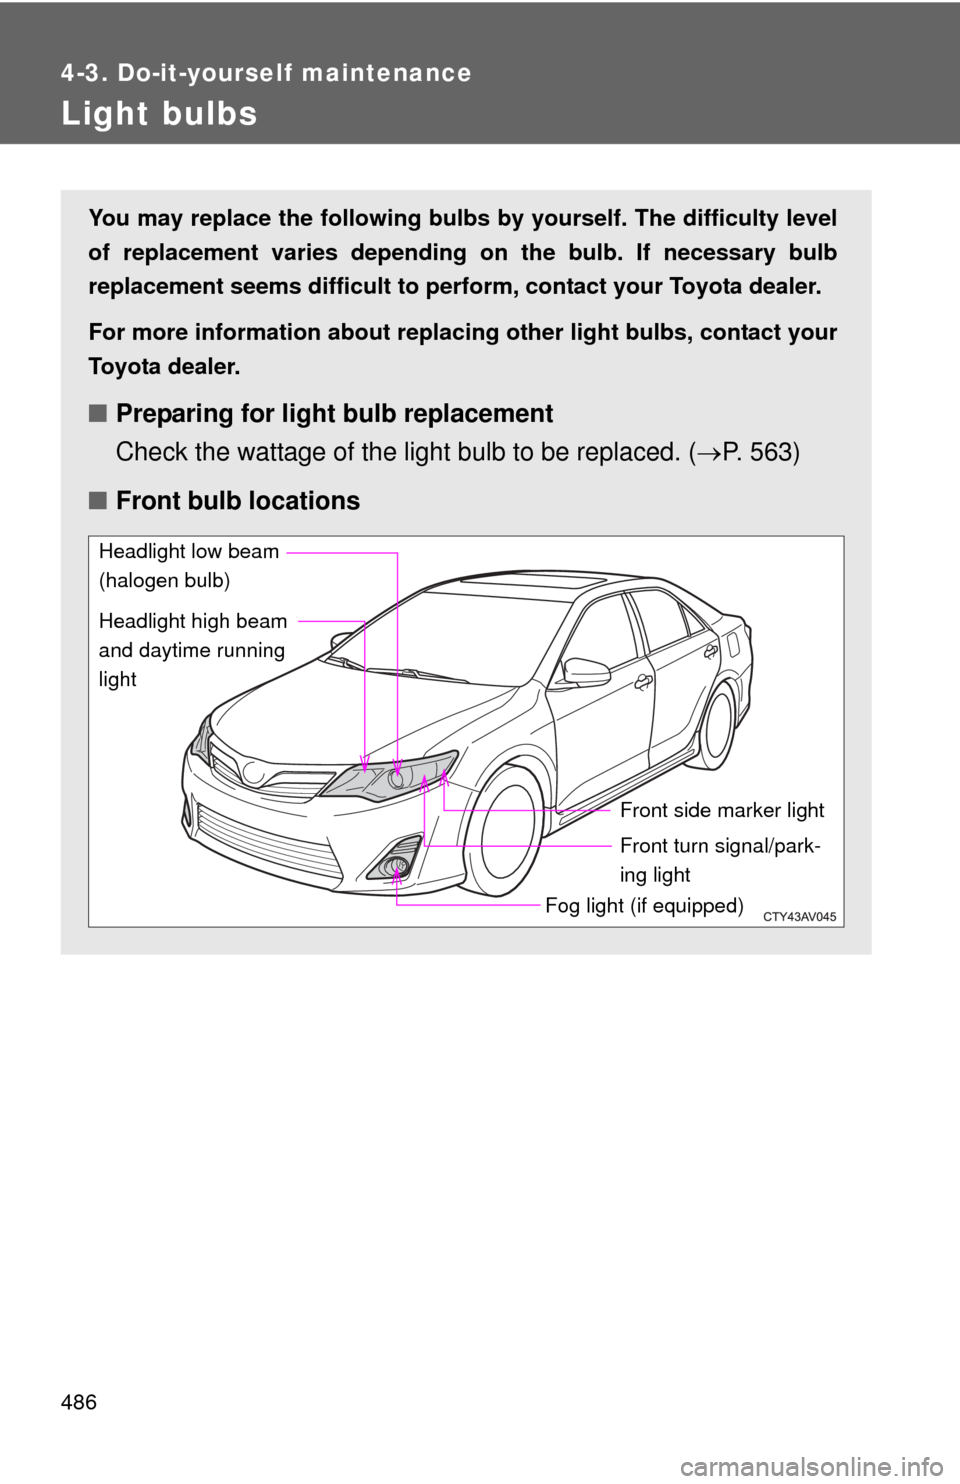 TOYOTA CAMRY 2014 XV50 / 9.G Owners Manual 486
4-3. Do-it-yourself maintenance
Light bulbs
You may replace the following bulbs by yourself. The difficulty level
of replacement varies depending on the bulb. If necessary bulb
replacement seems d